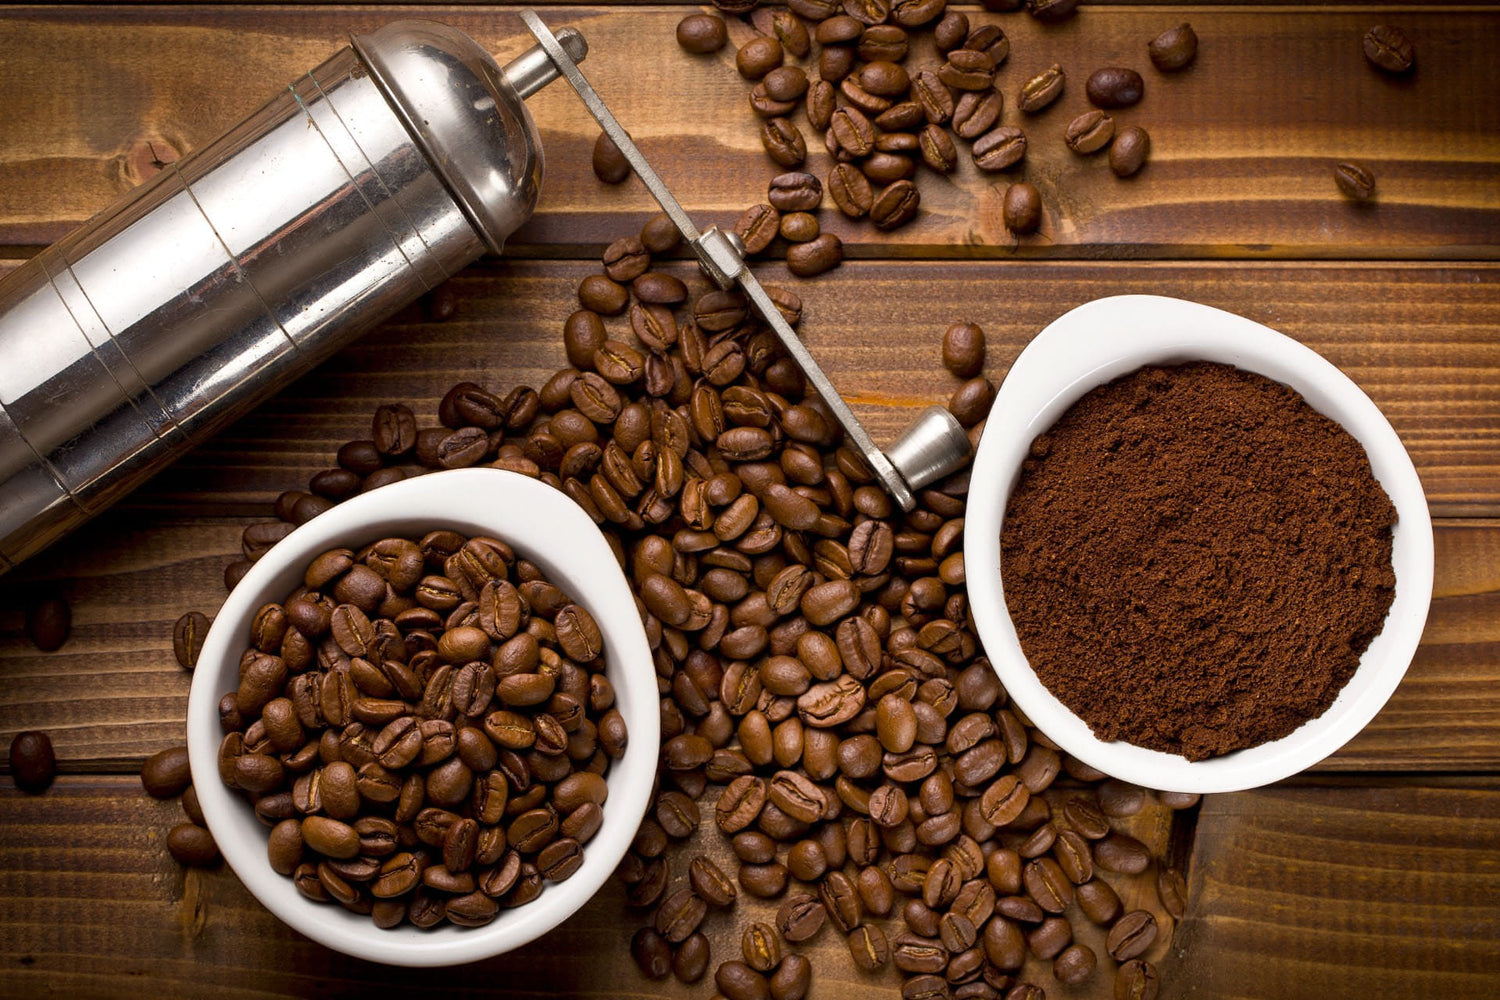 Types of grind, coffee beans and coffee ground.